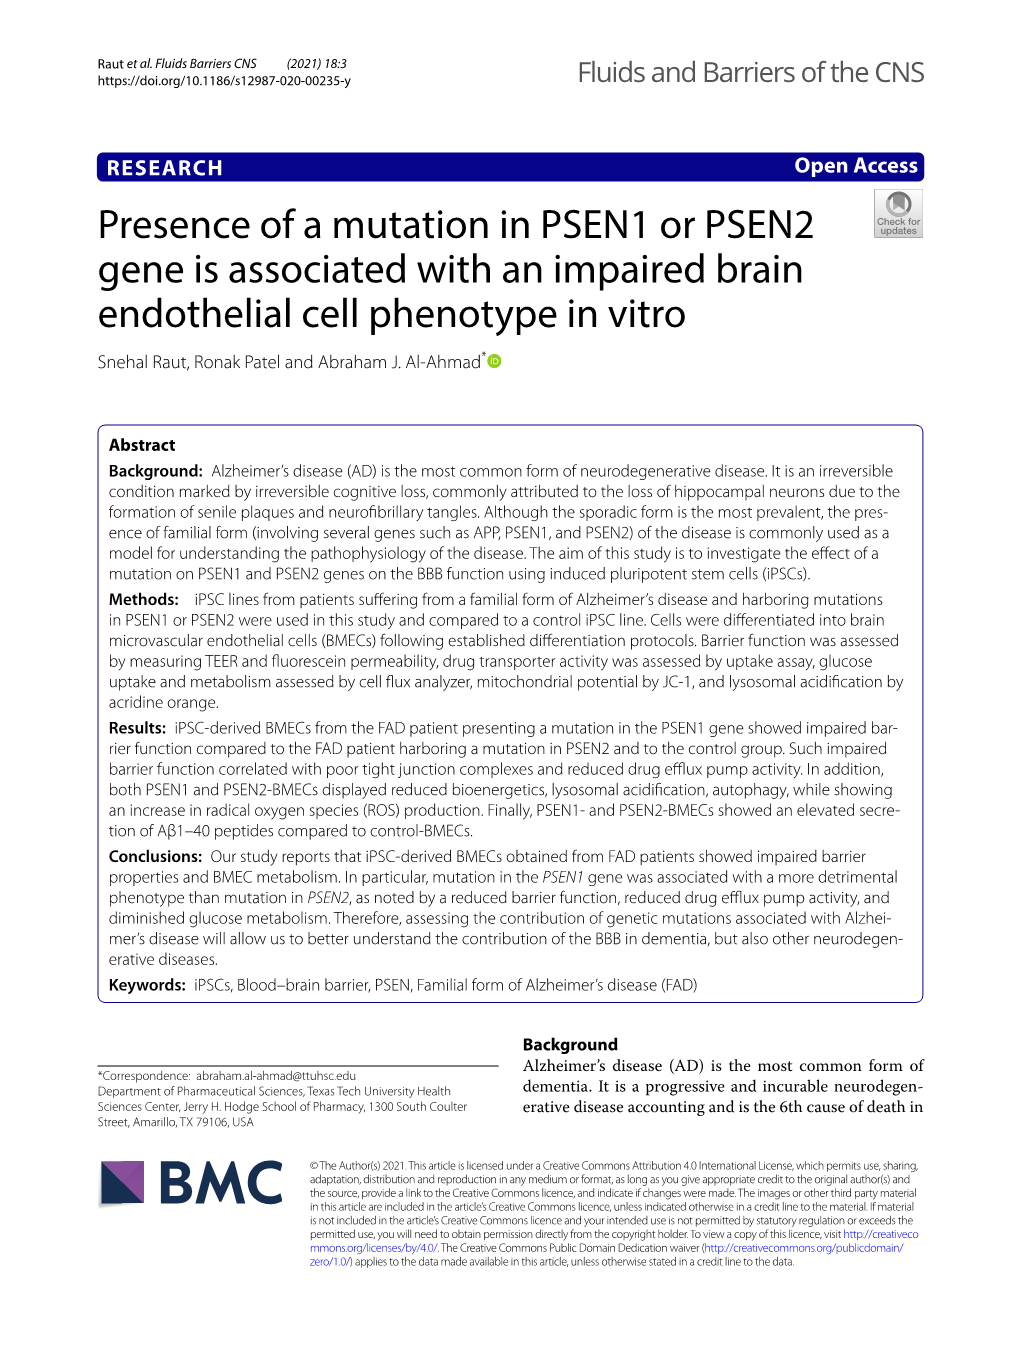 Presence of a Mutation in PSEN1 Or PSEN2 Gene Is Associated with an Impaired Brain Endothelial Cell Phenotype in Vitro Snehal Raut, Ronak Patel and Abraham J